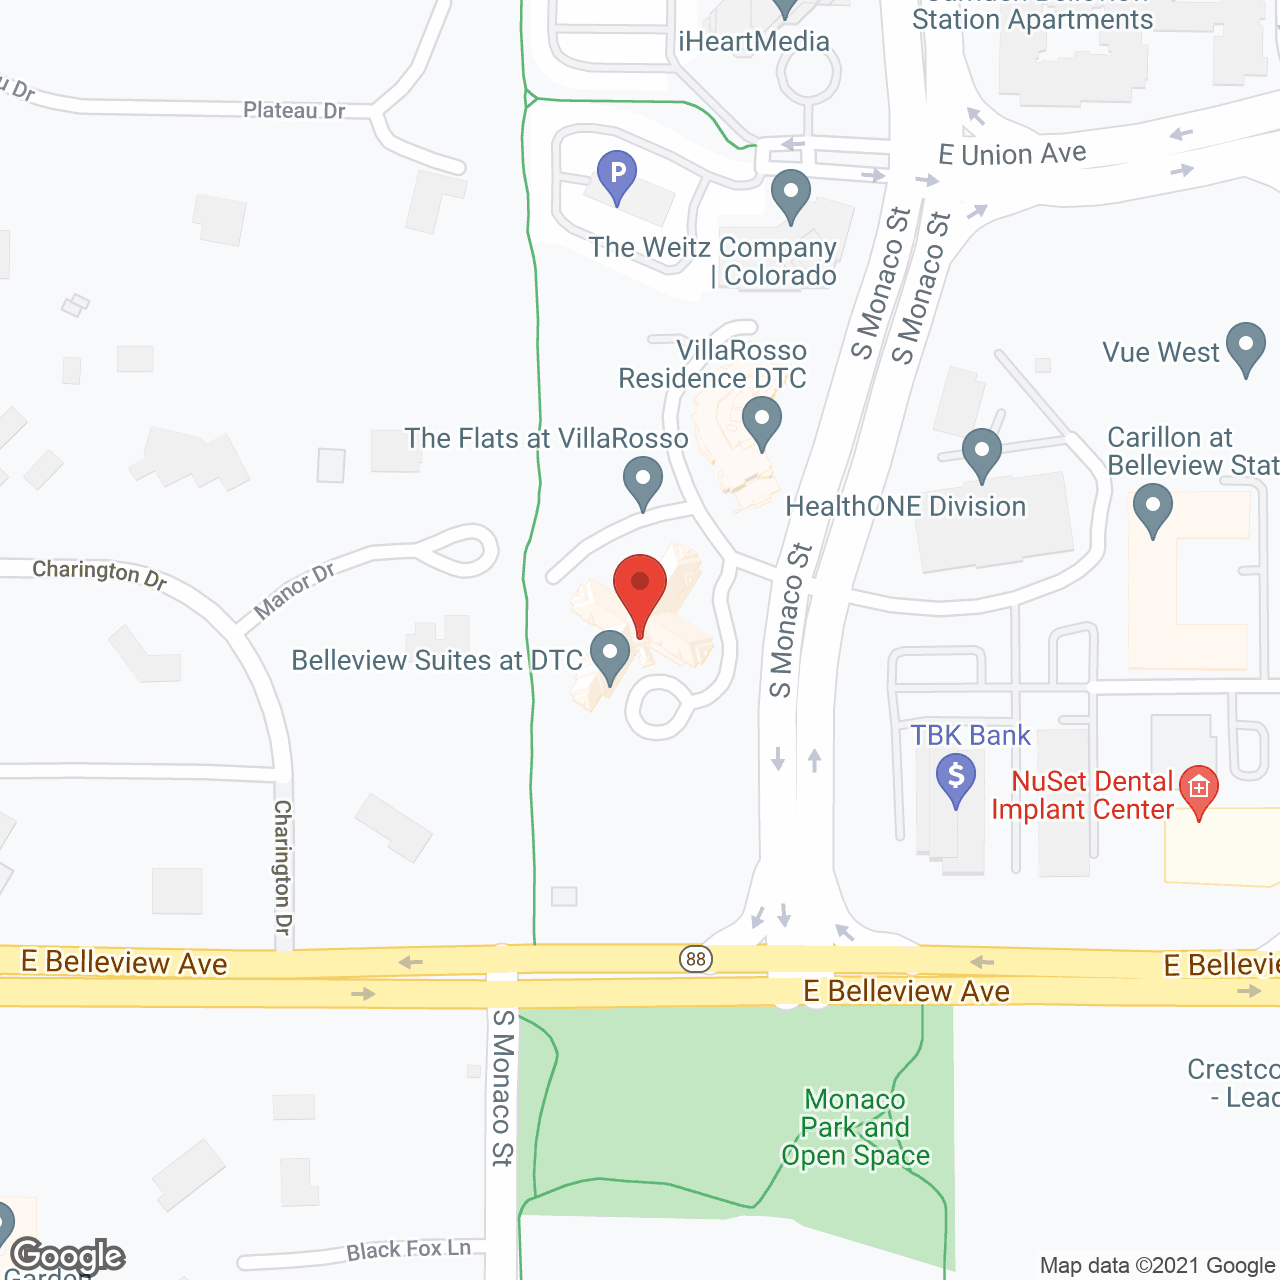 Belleview Suites at DTC in google map